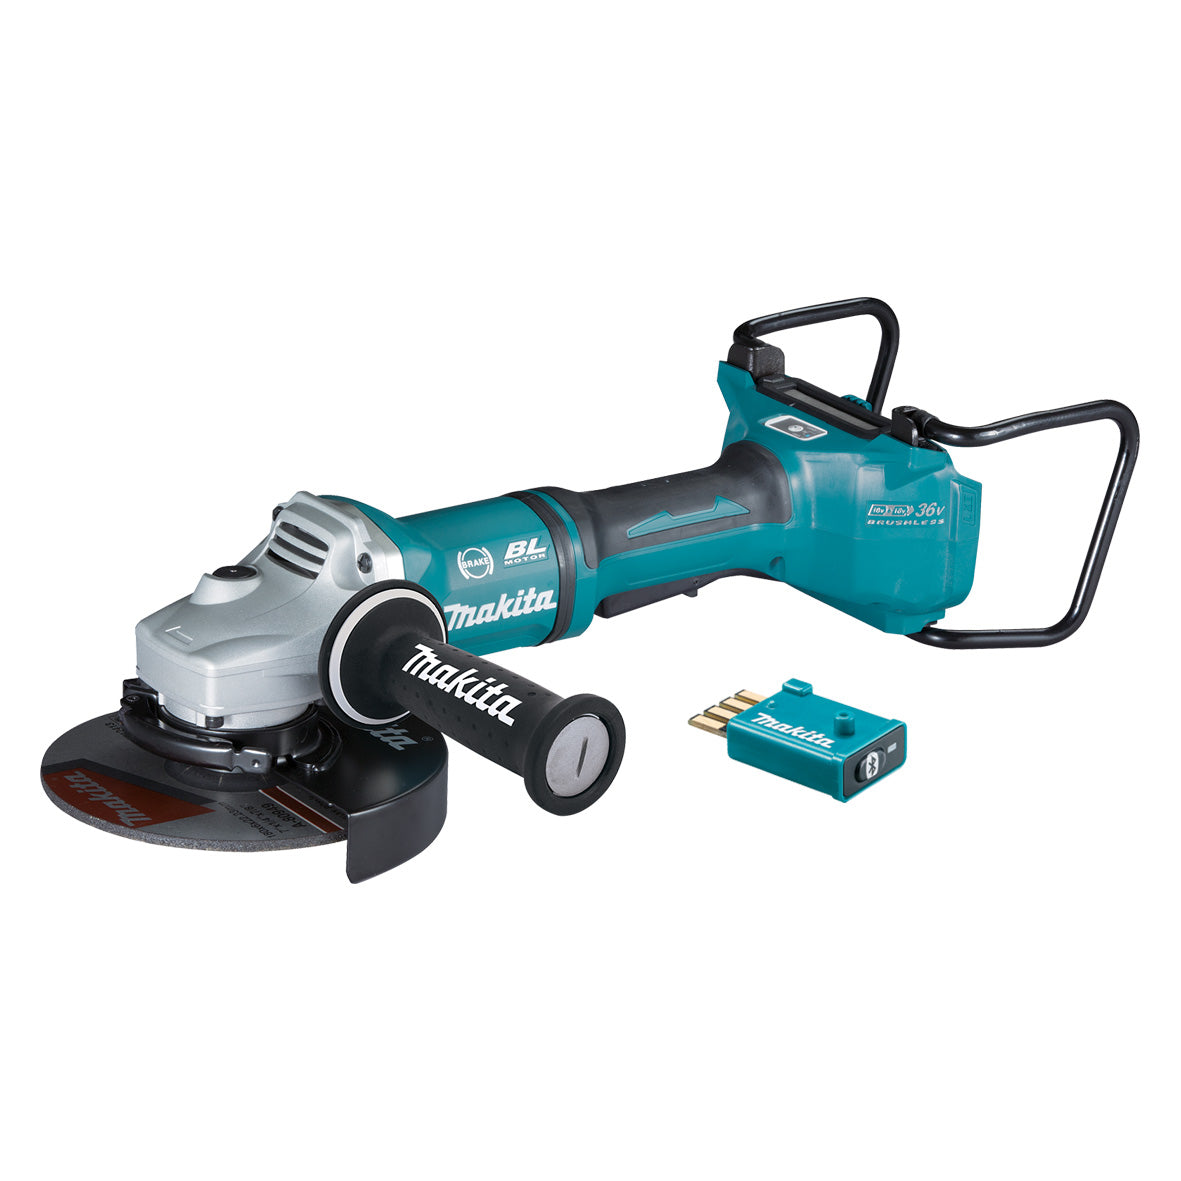 18Vx2 180mm (7") Brushless AWS Angle Grinder Bare (Tool Only) DGA701ZKU1 by Makita